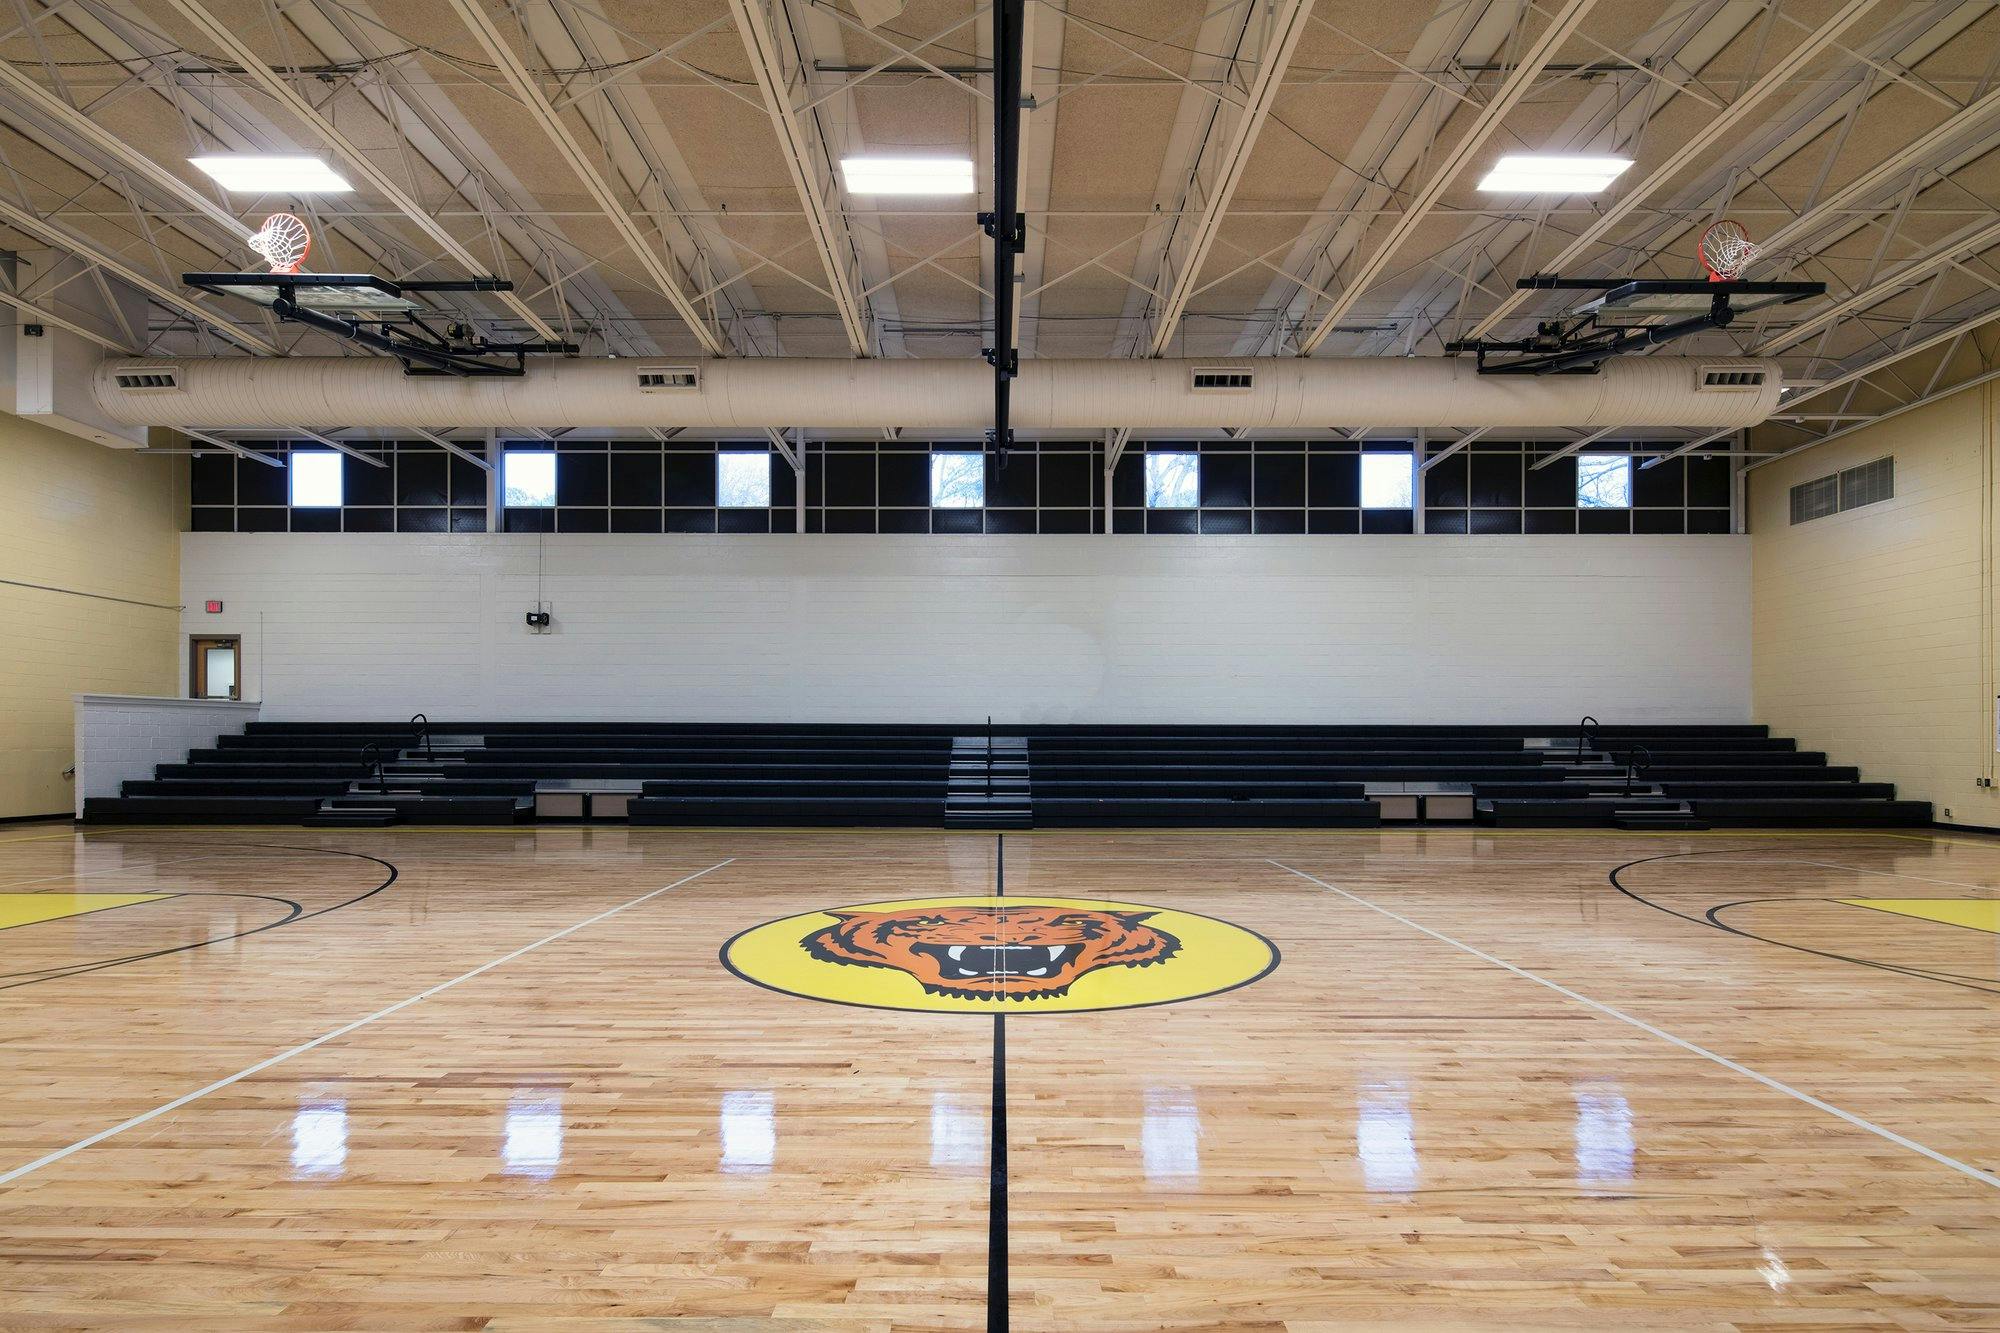 A tiger mascot is seen painted in a yellow circle on a gymnasium basketball court.